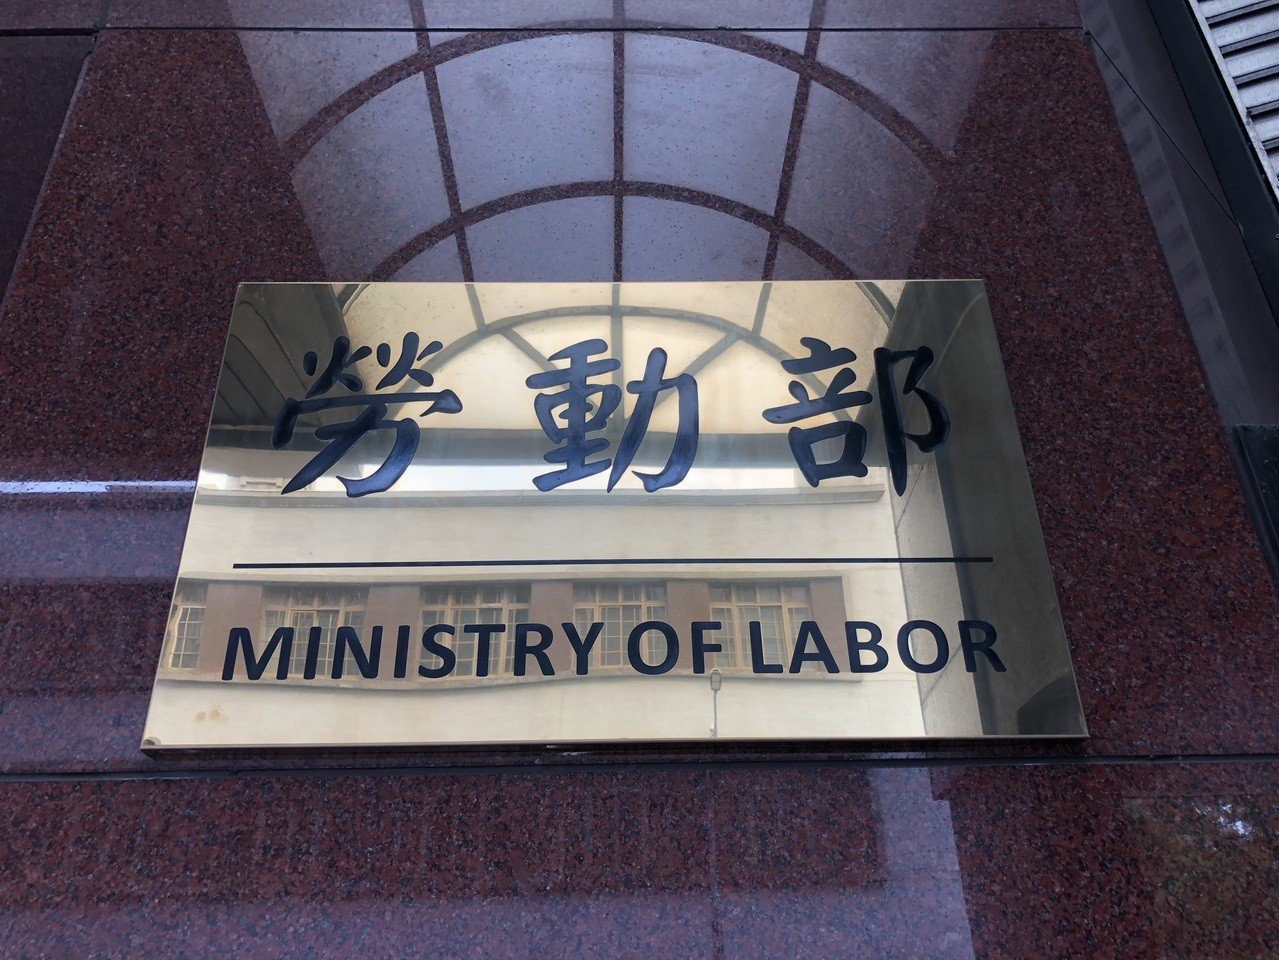 Ministry of Labor reminds employers to check caregivers’ identities carefully. (Photo / Provided by Ministry of Labor)